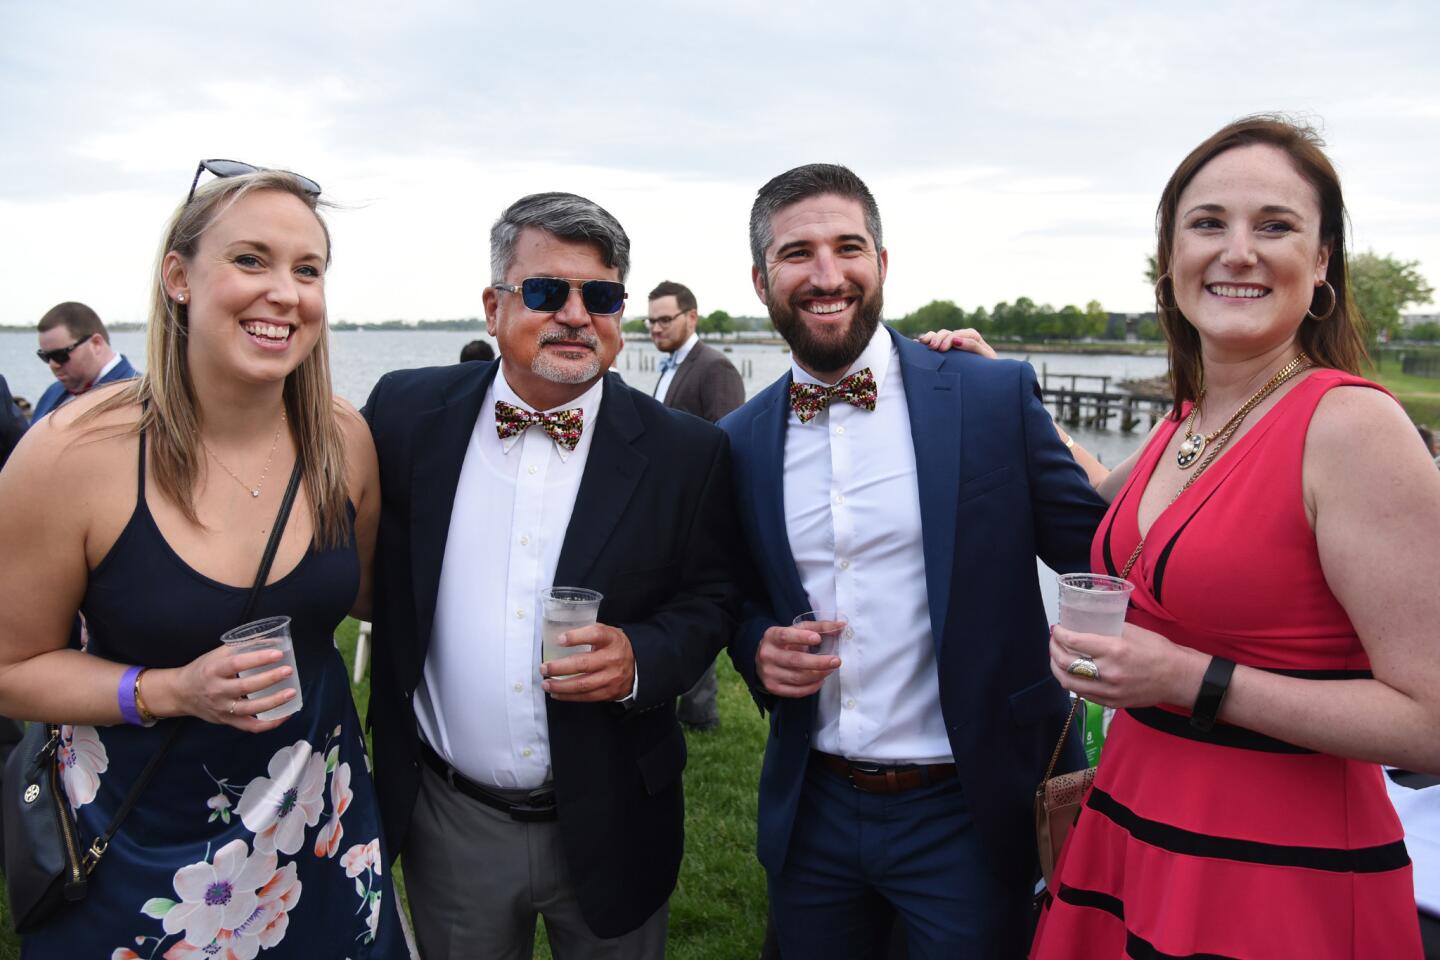 From left, Jessica Malacrida, Mike Alley, Eoghan Doherty and Yelena Trepetin at the Bourbon and Bowties charity fundraiser held at Rye Street Tavern in Port Covington.